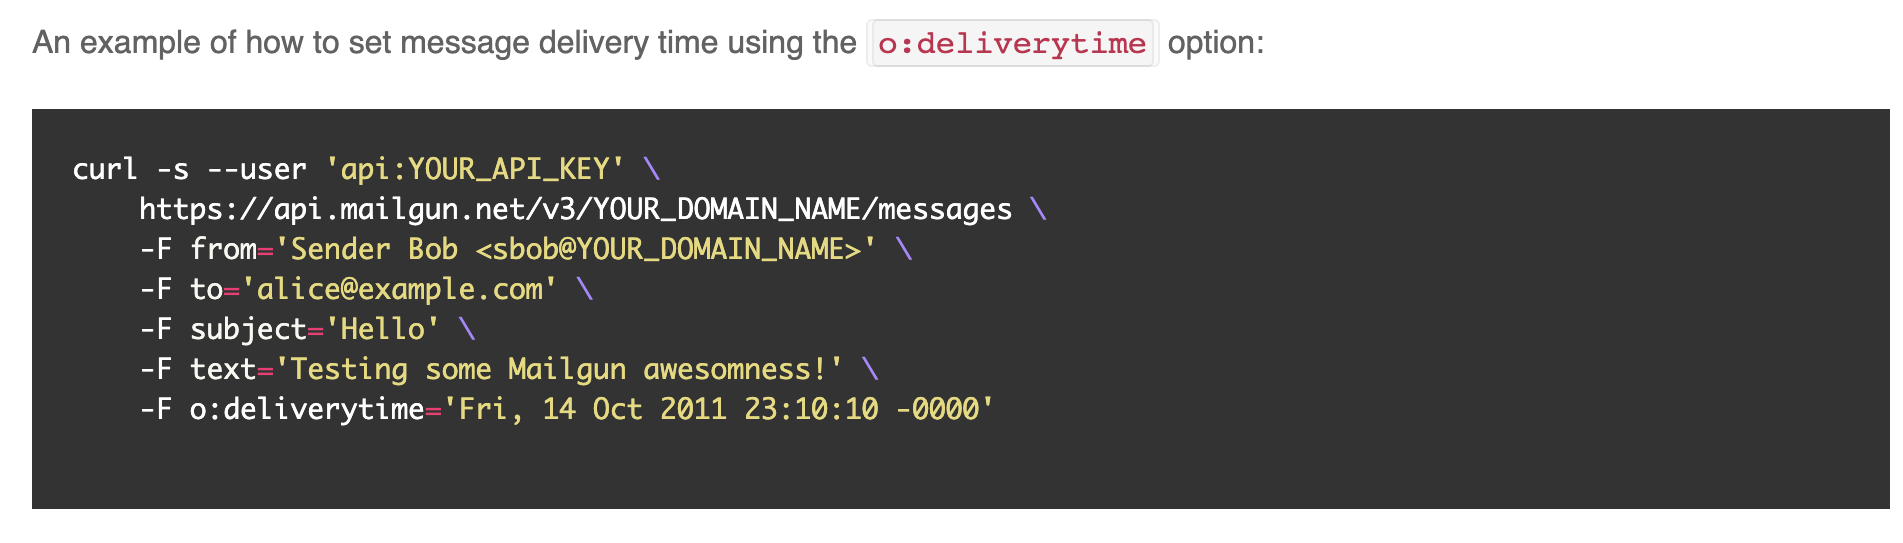 Setting a delivery time in cURL code for a message